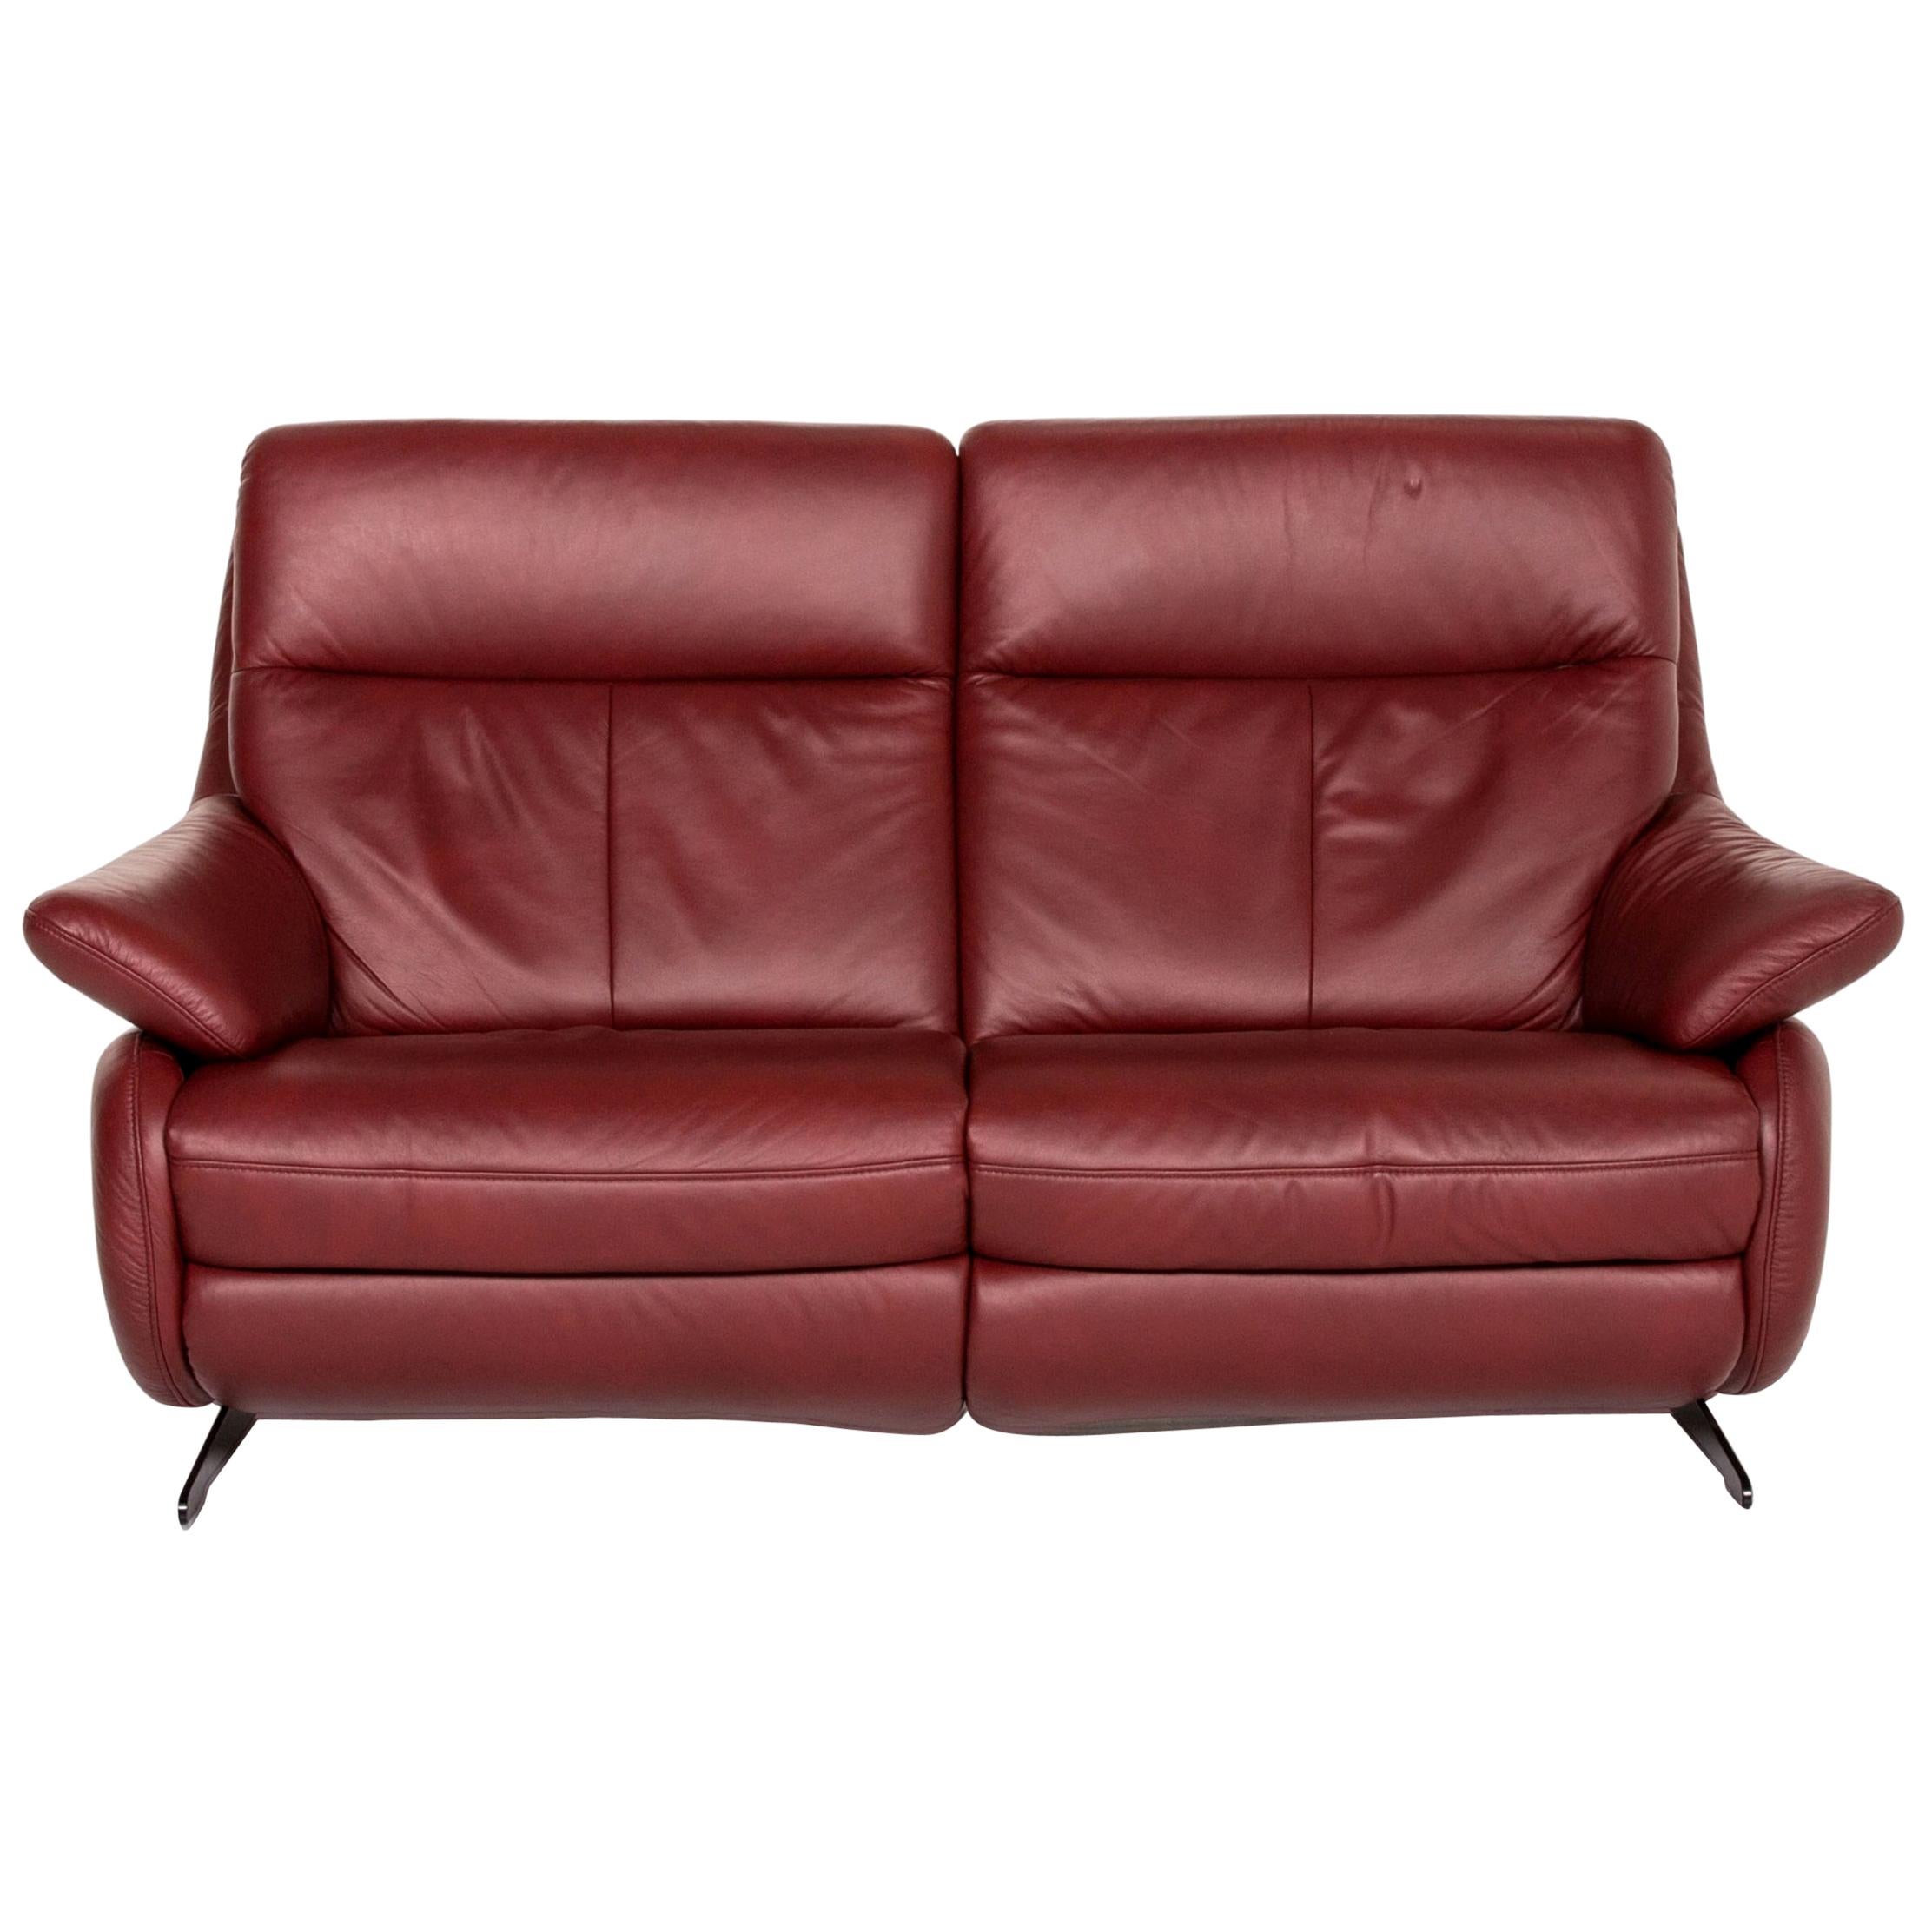 Himolla Leather Sofa Electric Function Red Dark Red Relax Function Couch For Sale